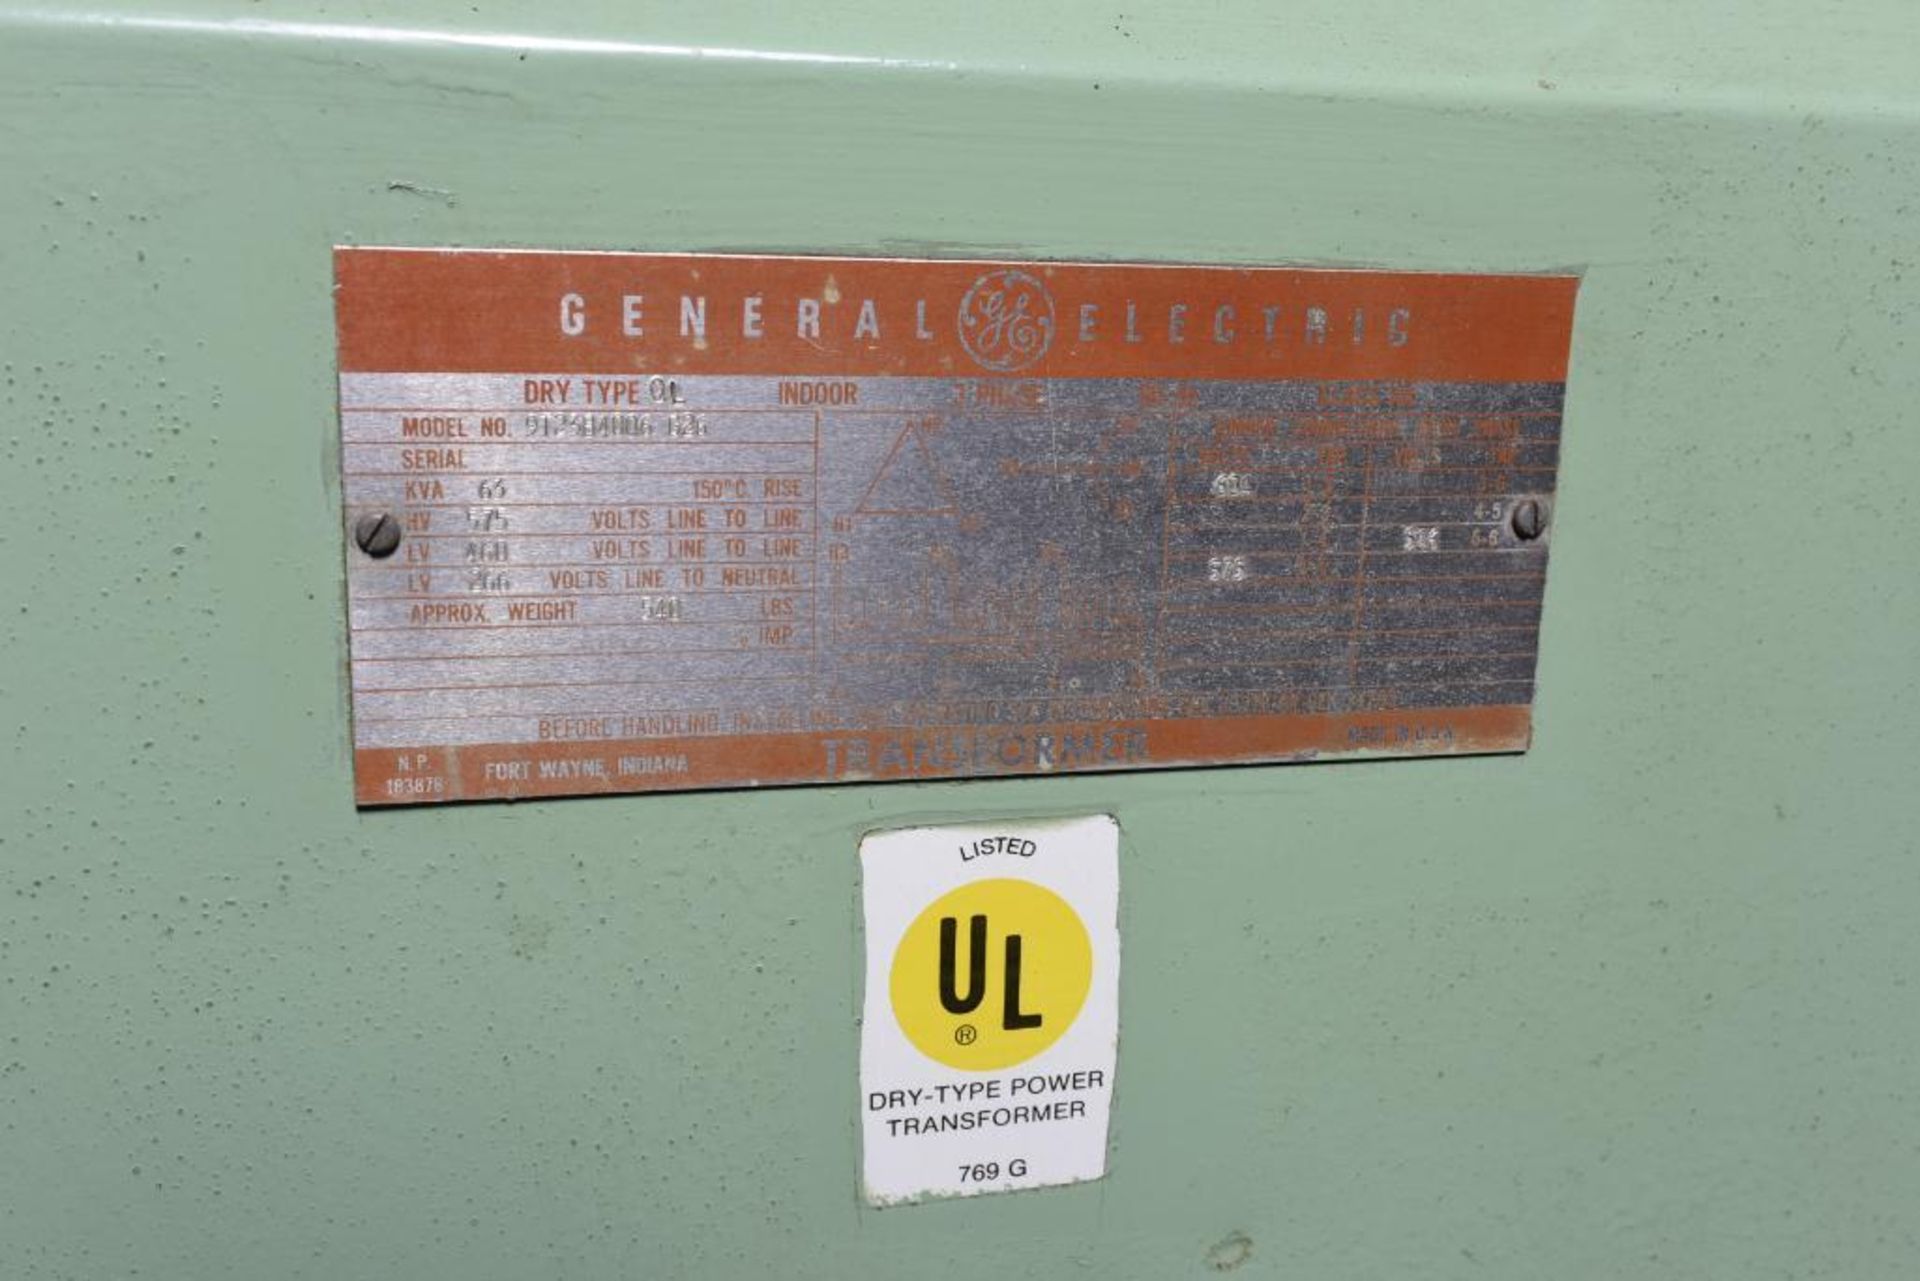 GENERAL ELECTRIC DRY TYPE QL INDOOR 3-PH TRANSFORMER, MODEL: 9T23B4006 G26, KVA: 63, HIGH VOLTS: 575 - Image 2 of 2